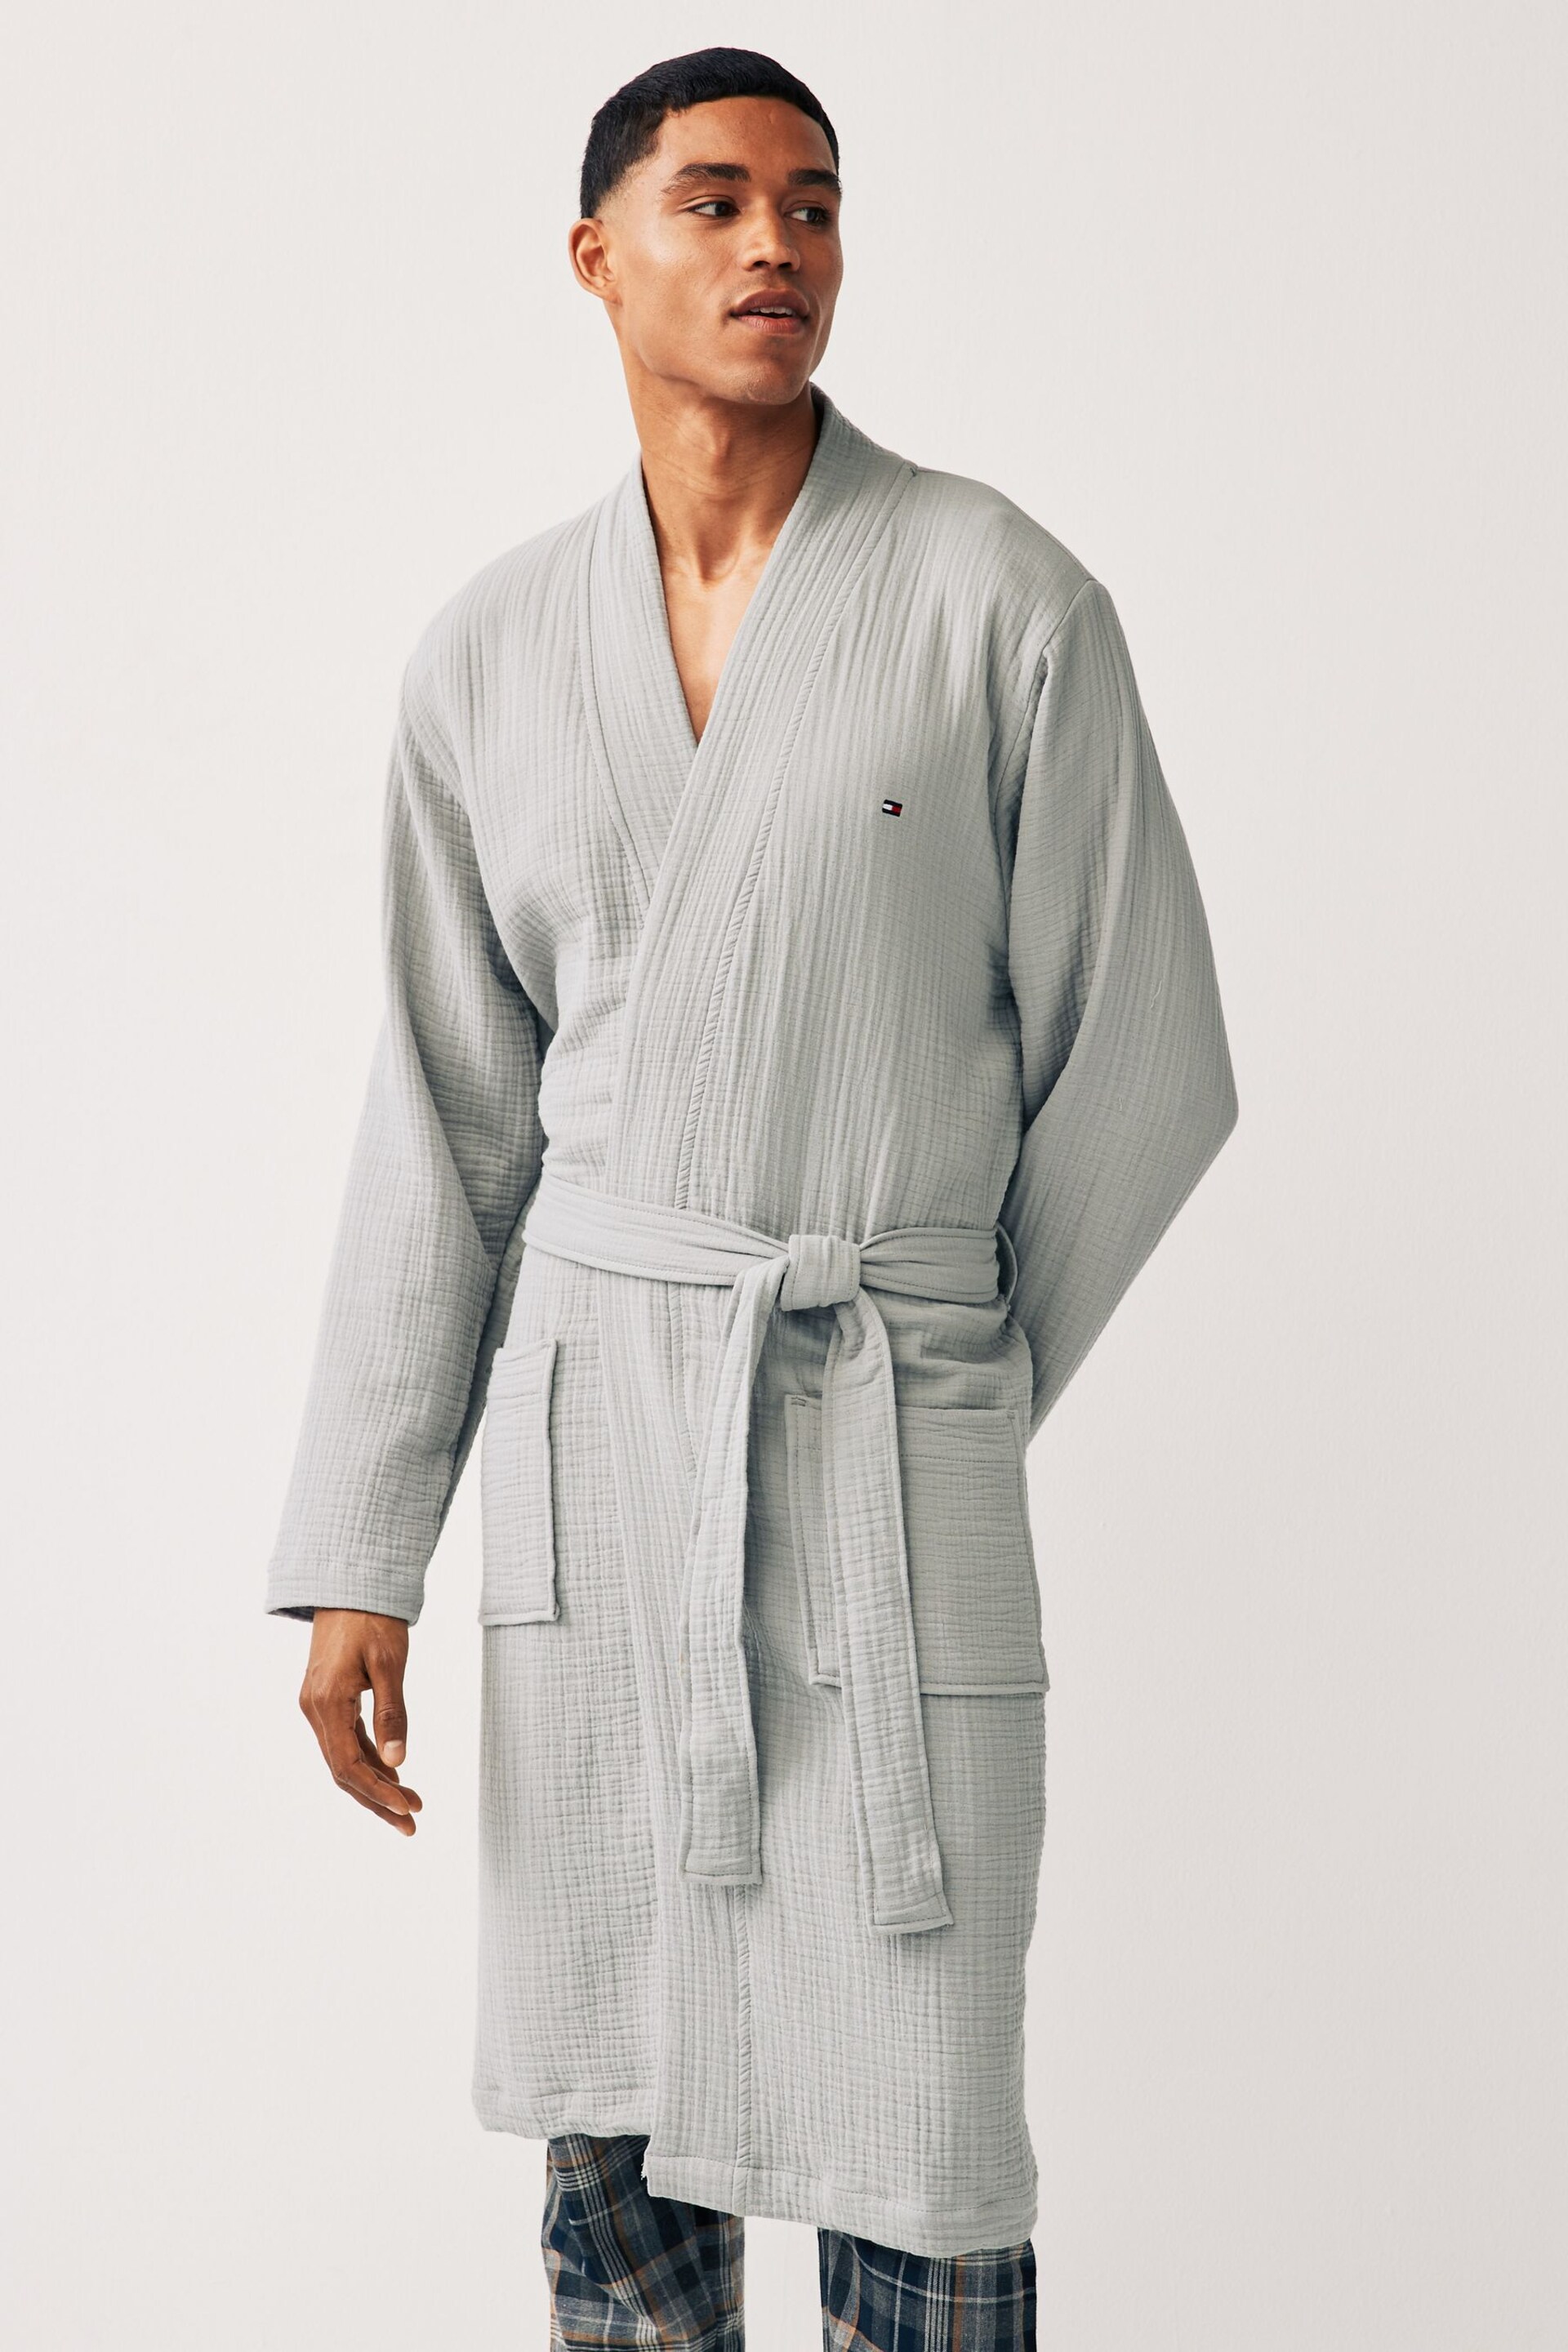 Tommy Hilfiger Grey Woven Robe - Image 3 of 5